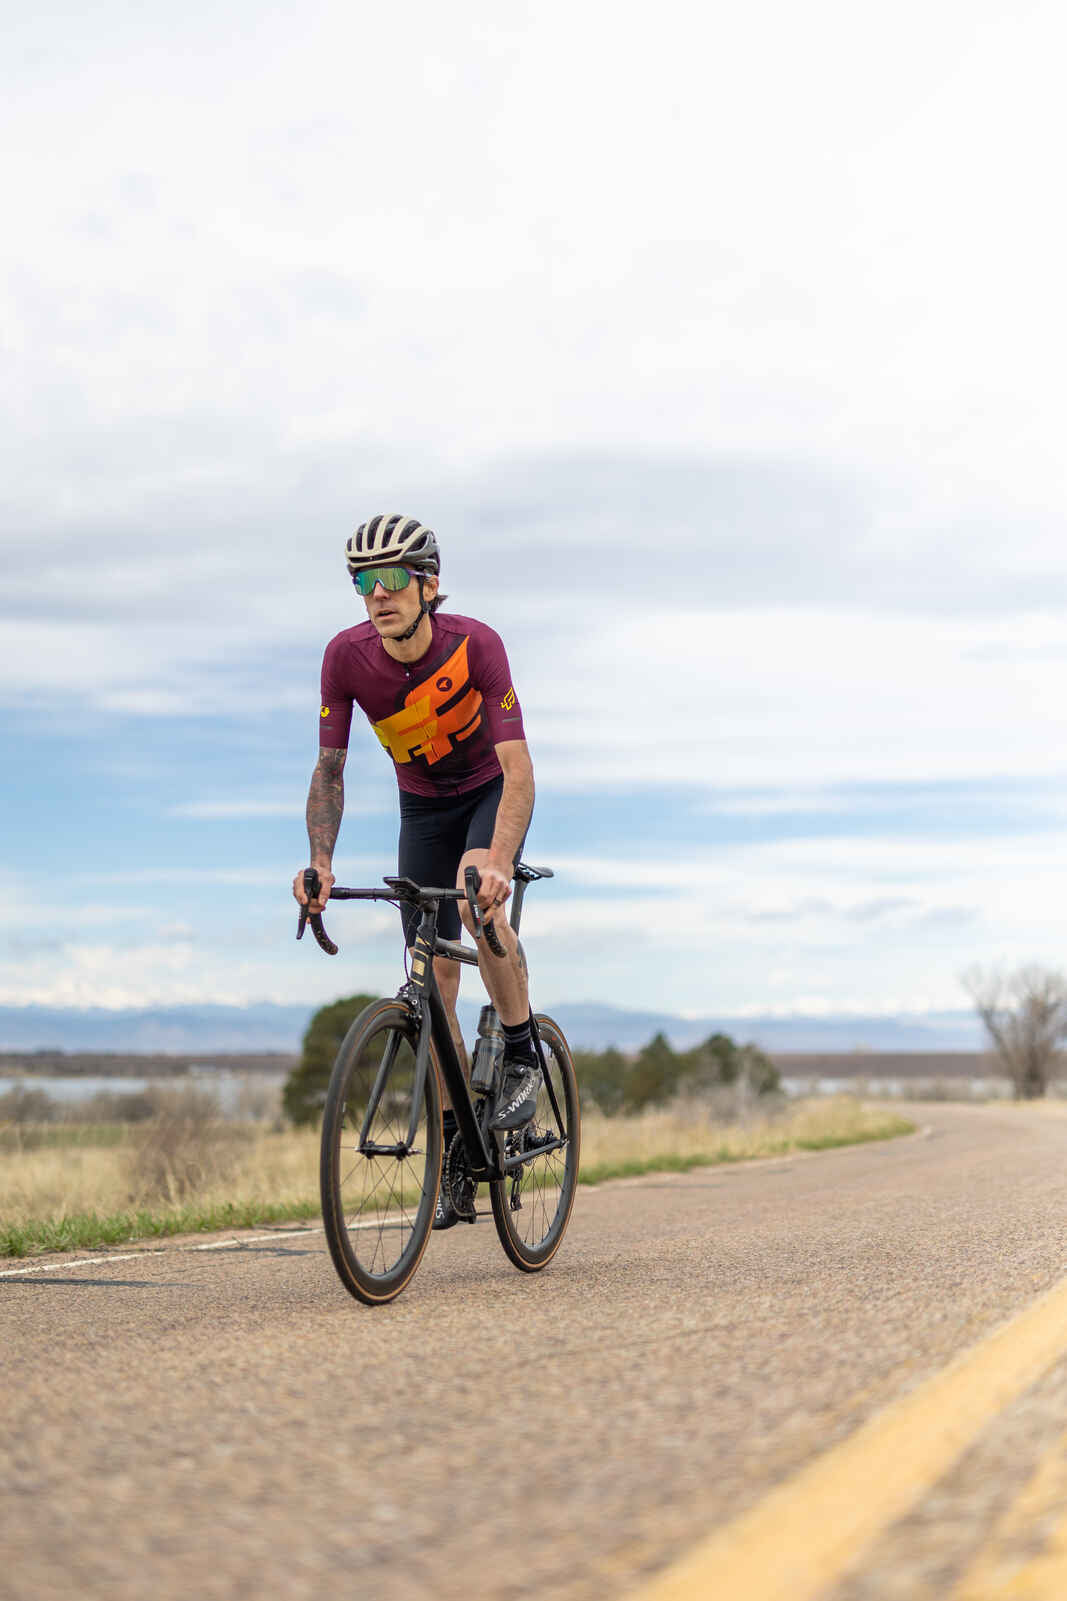 Burgundy Aero Cycling Jersey for Men - On the Road